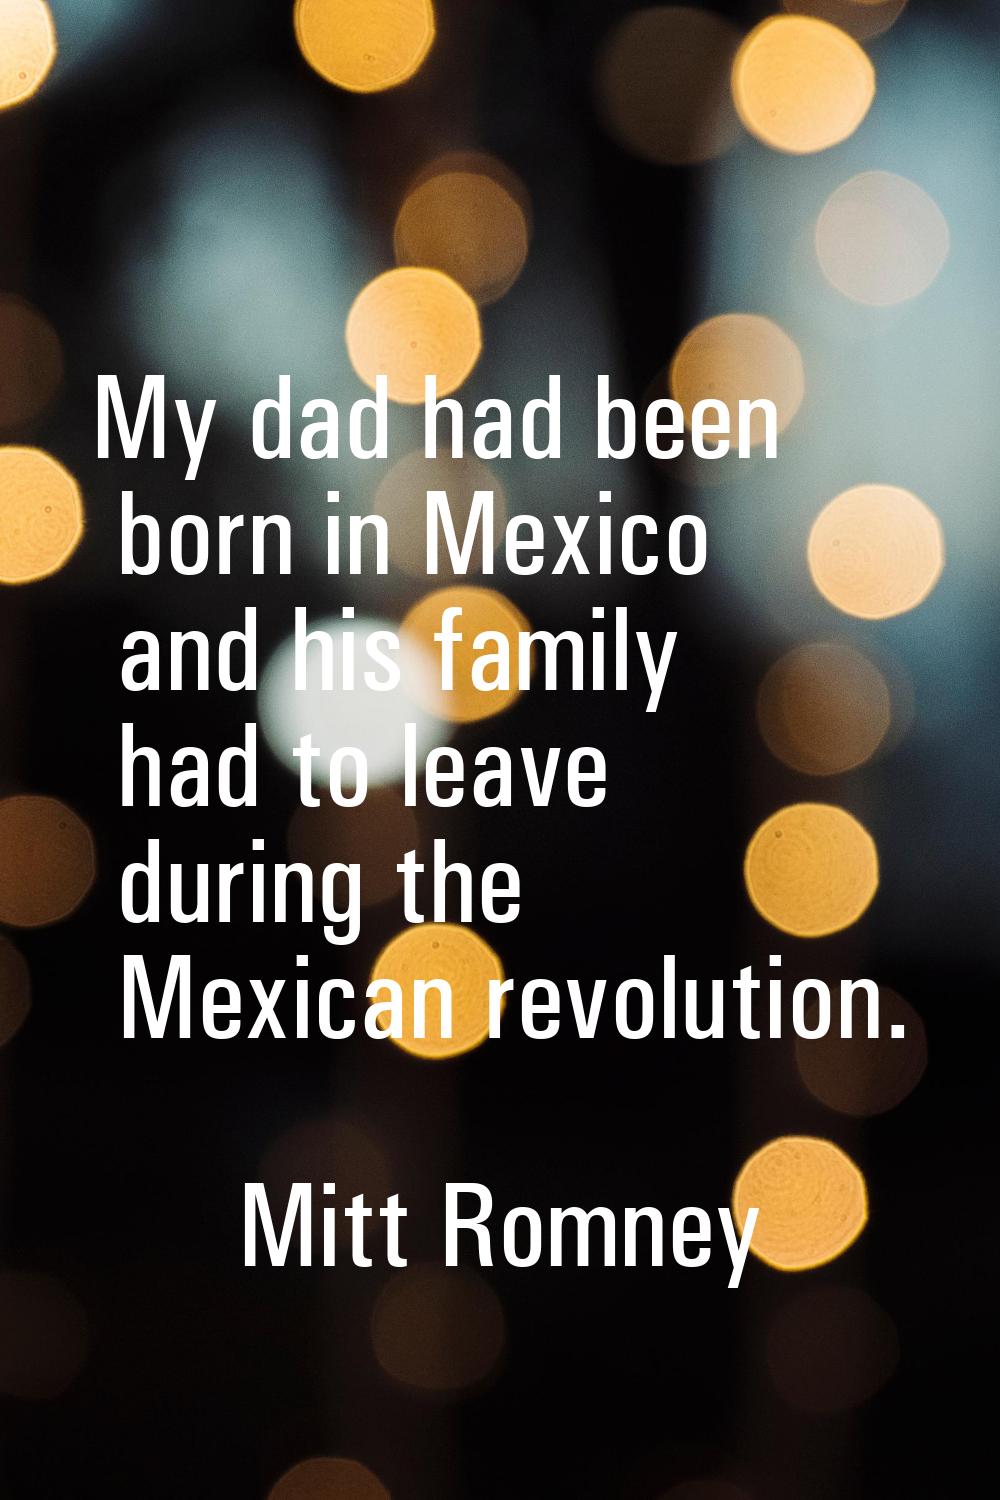 My dad had been born in Mexico and his family had to leave during the Mexican revolution.